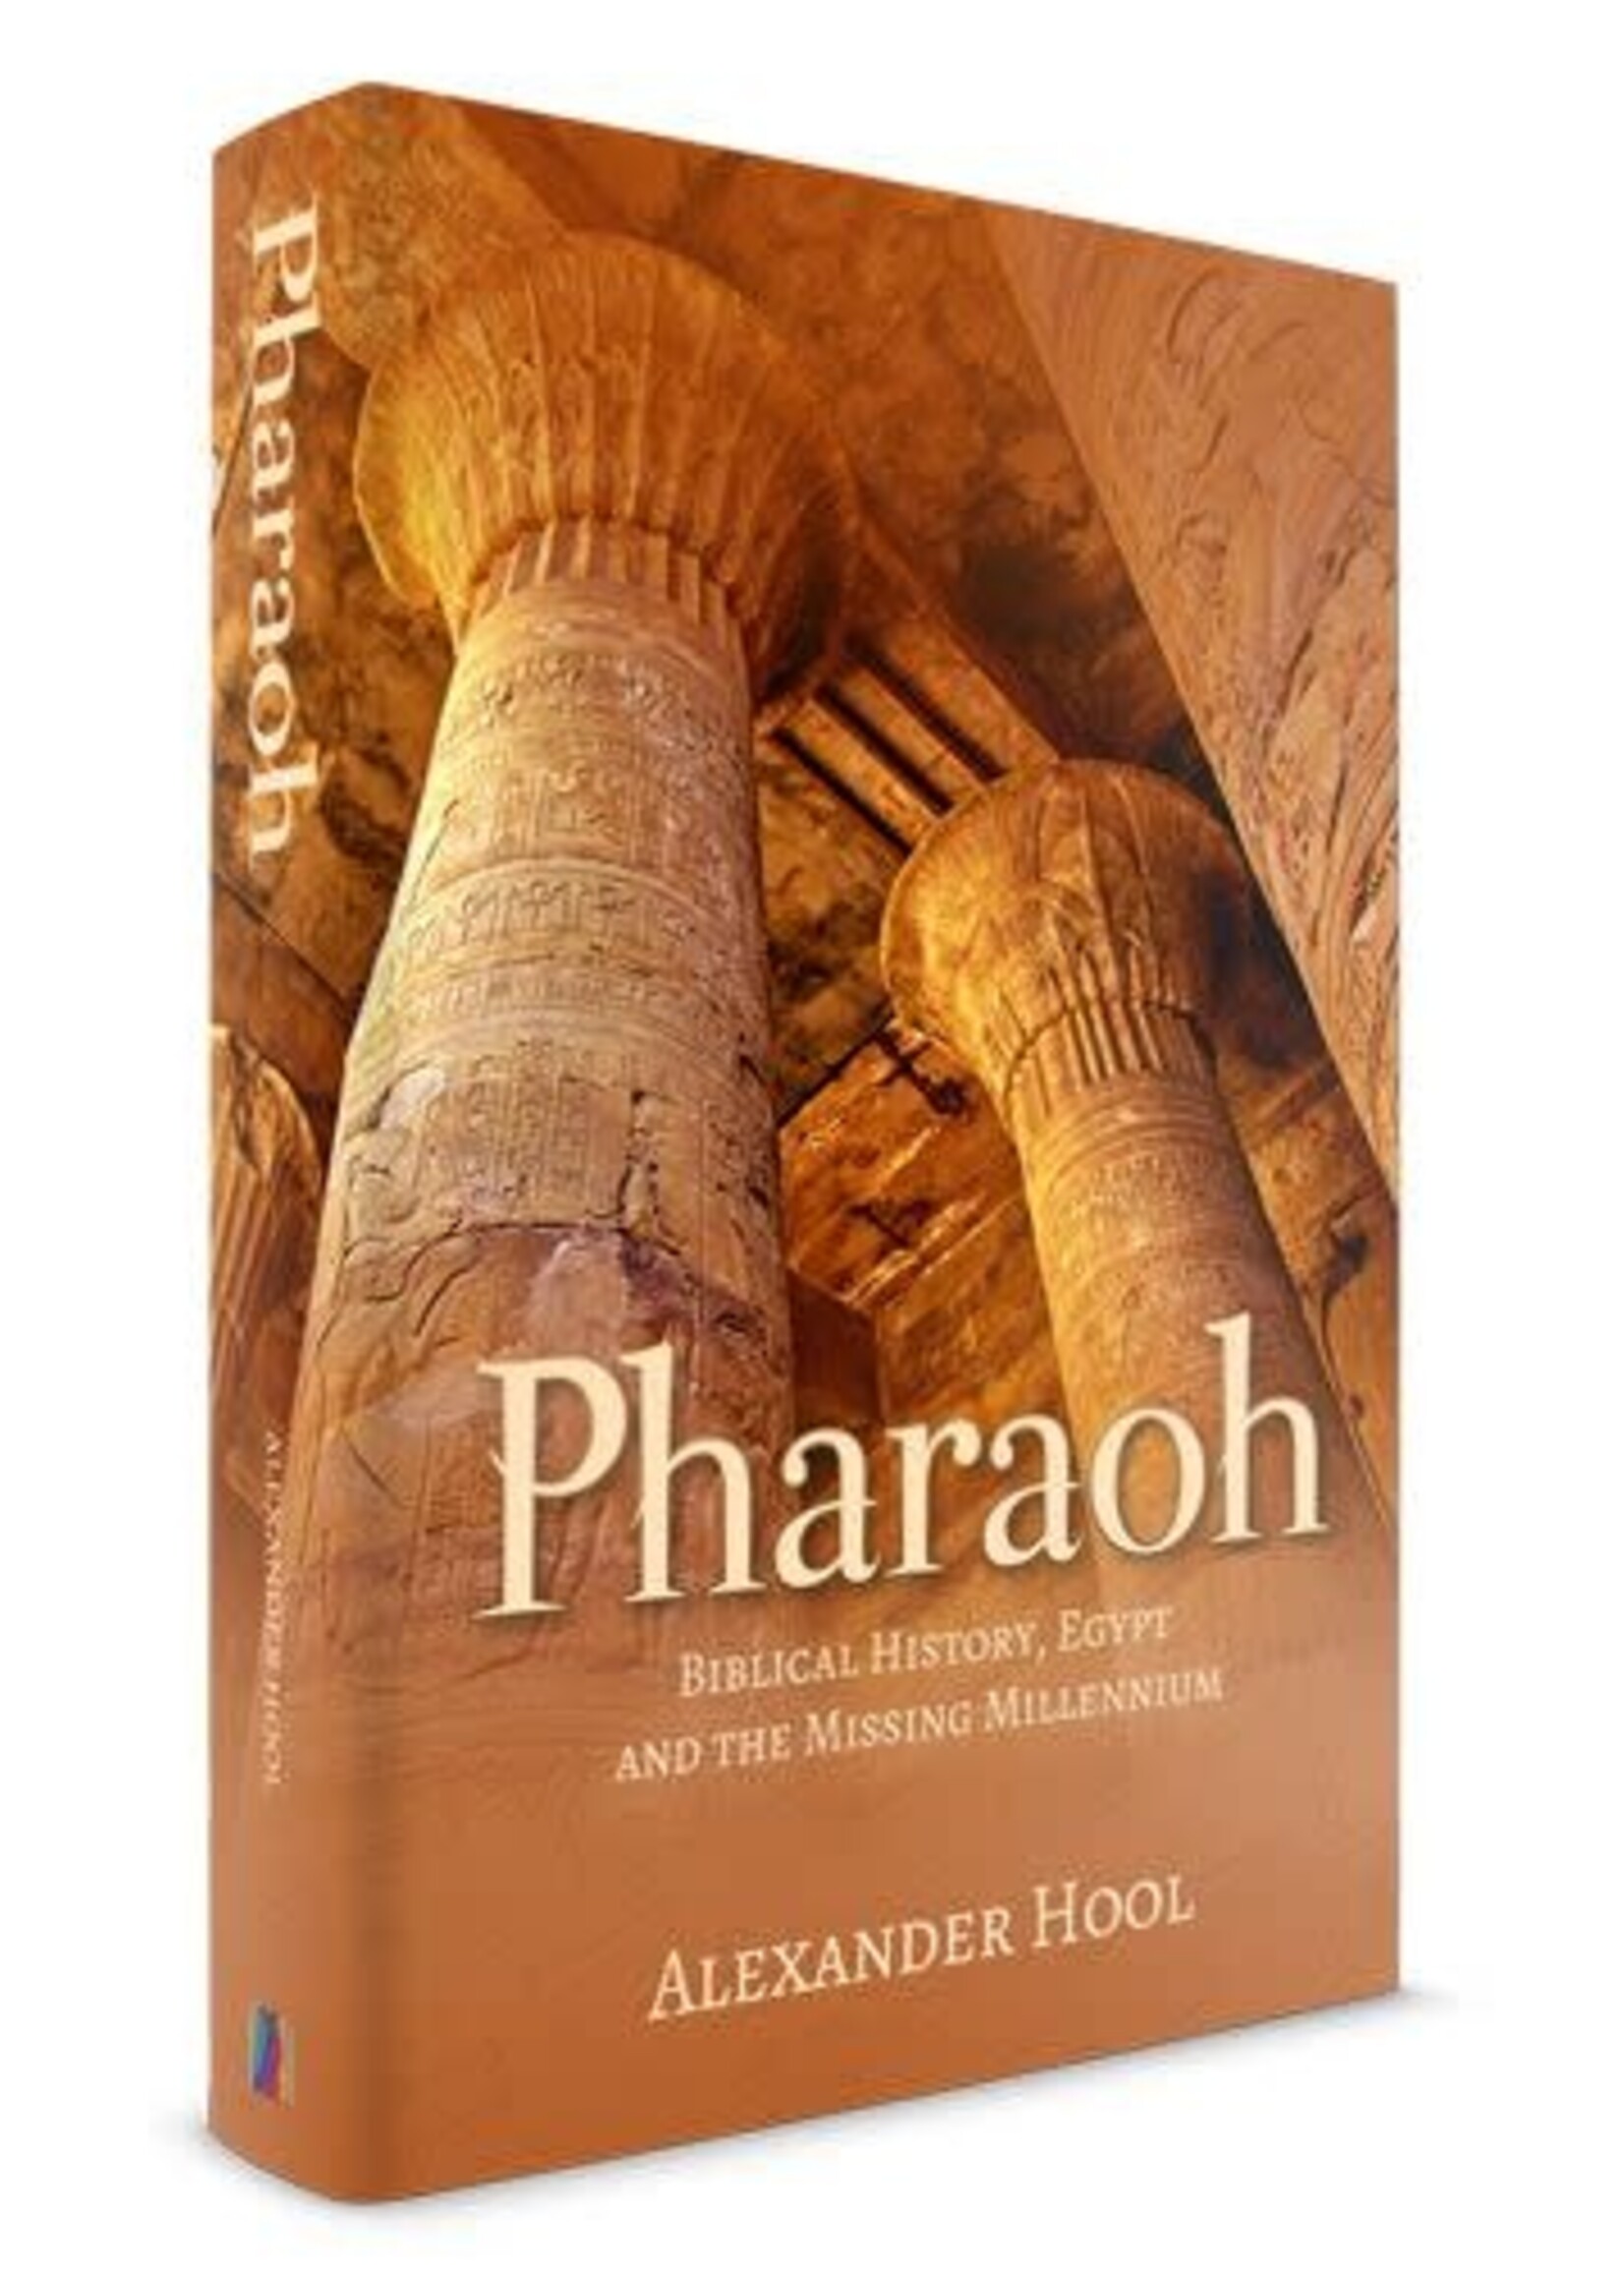 Pharaoh - Biblical History/ Egypt And The Missing Millennium